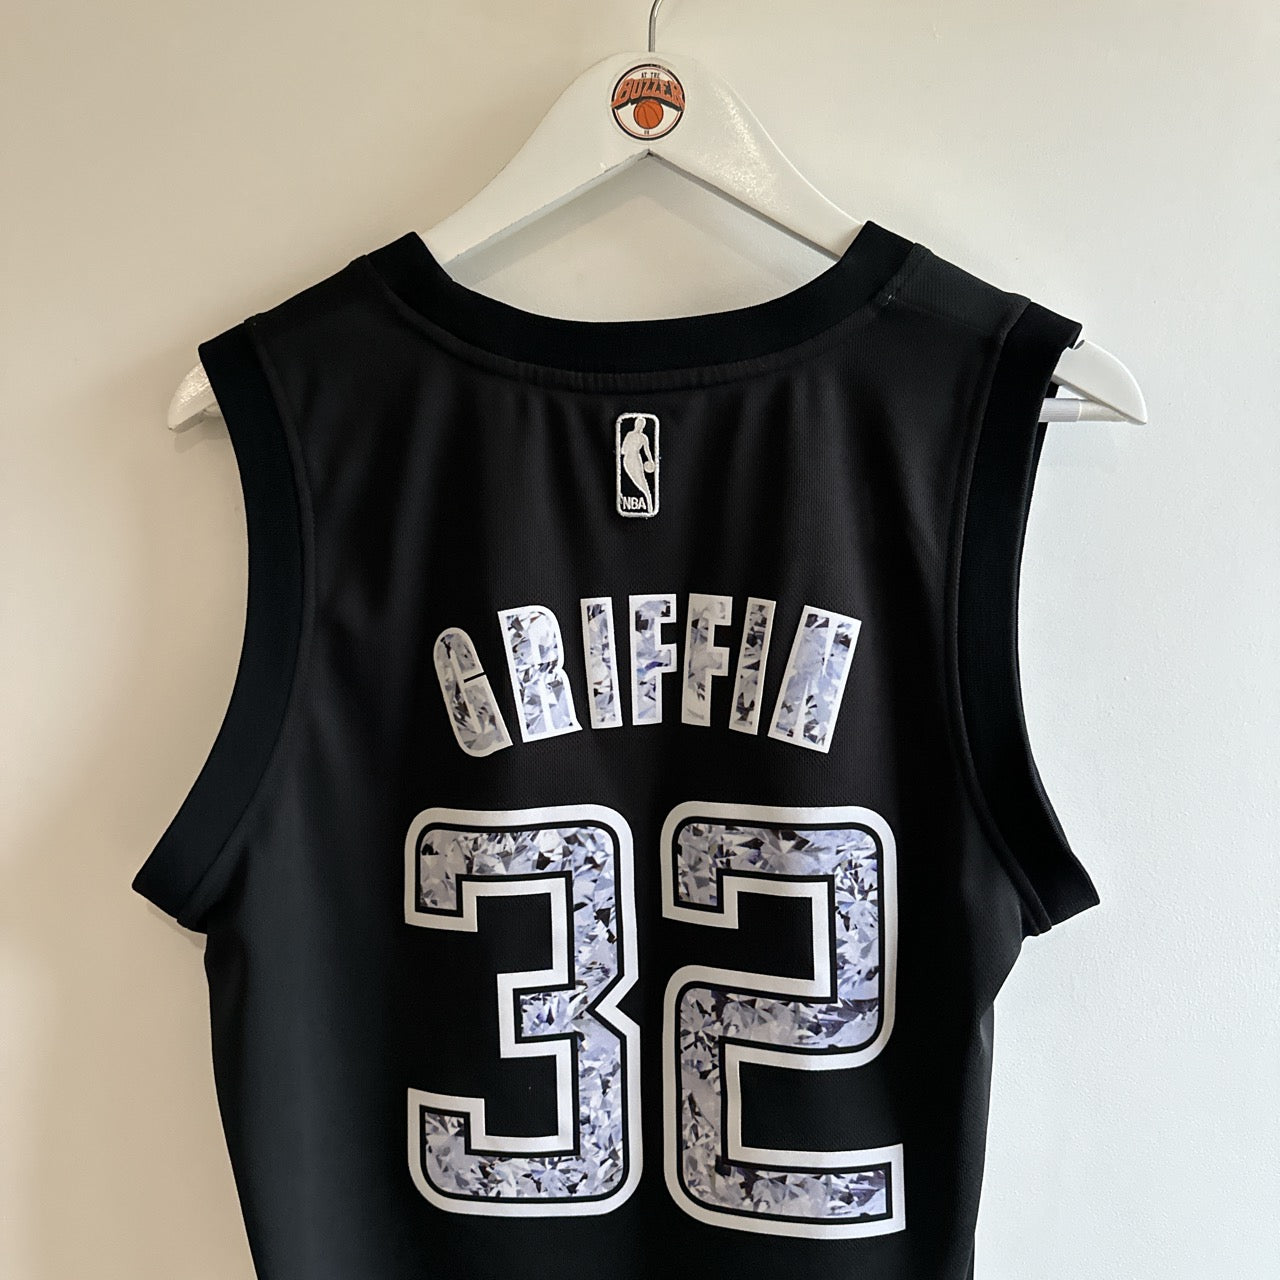 Los Angeles Clippers Blake Griffin Adidas jersey - Small (Fits medium)